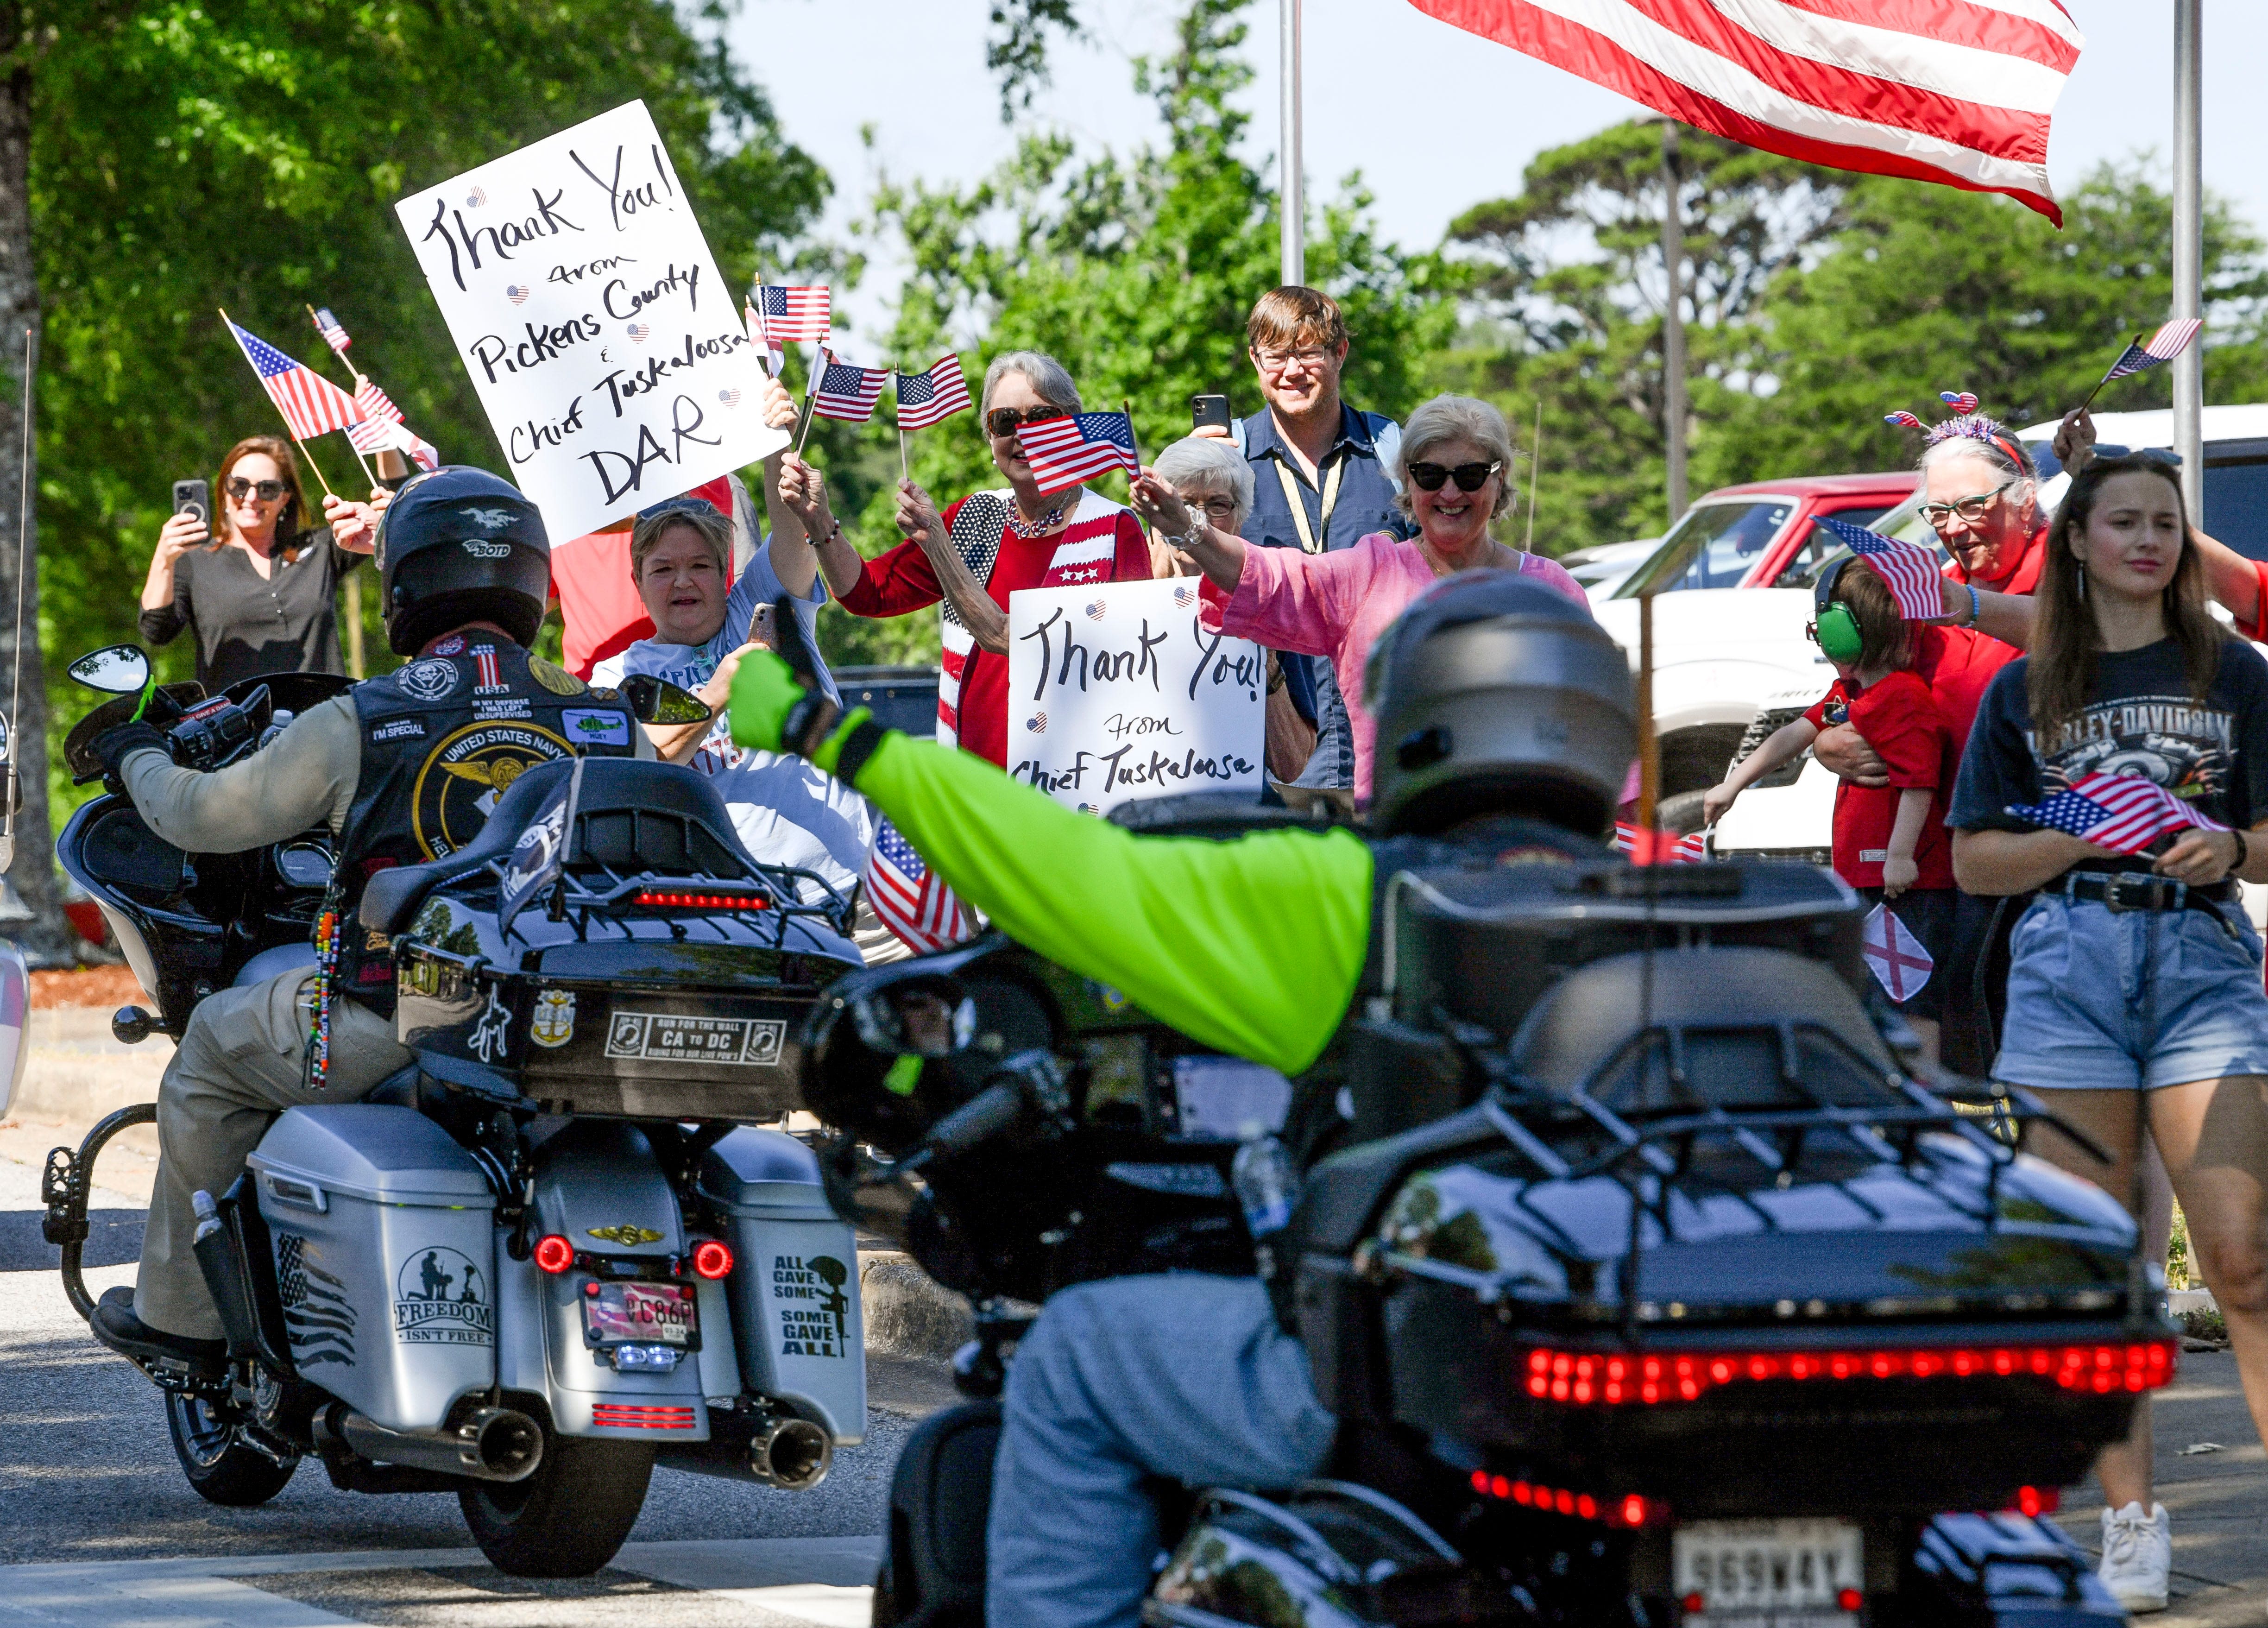 Motorcycles roar into Tuscaloosa as part of nationwide Run for the Wall